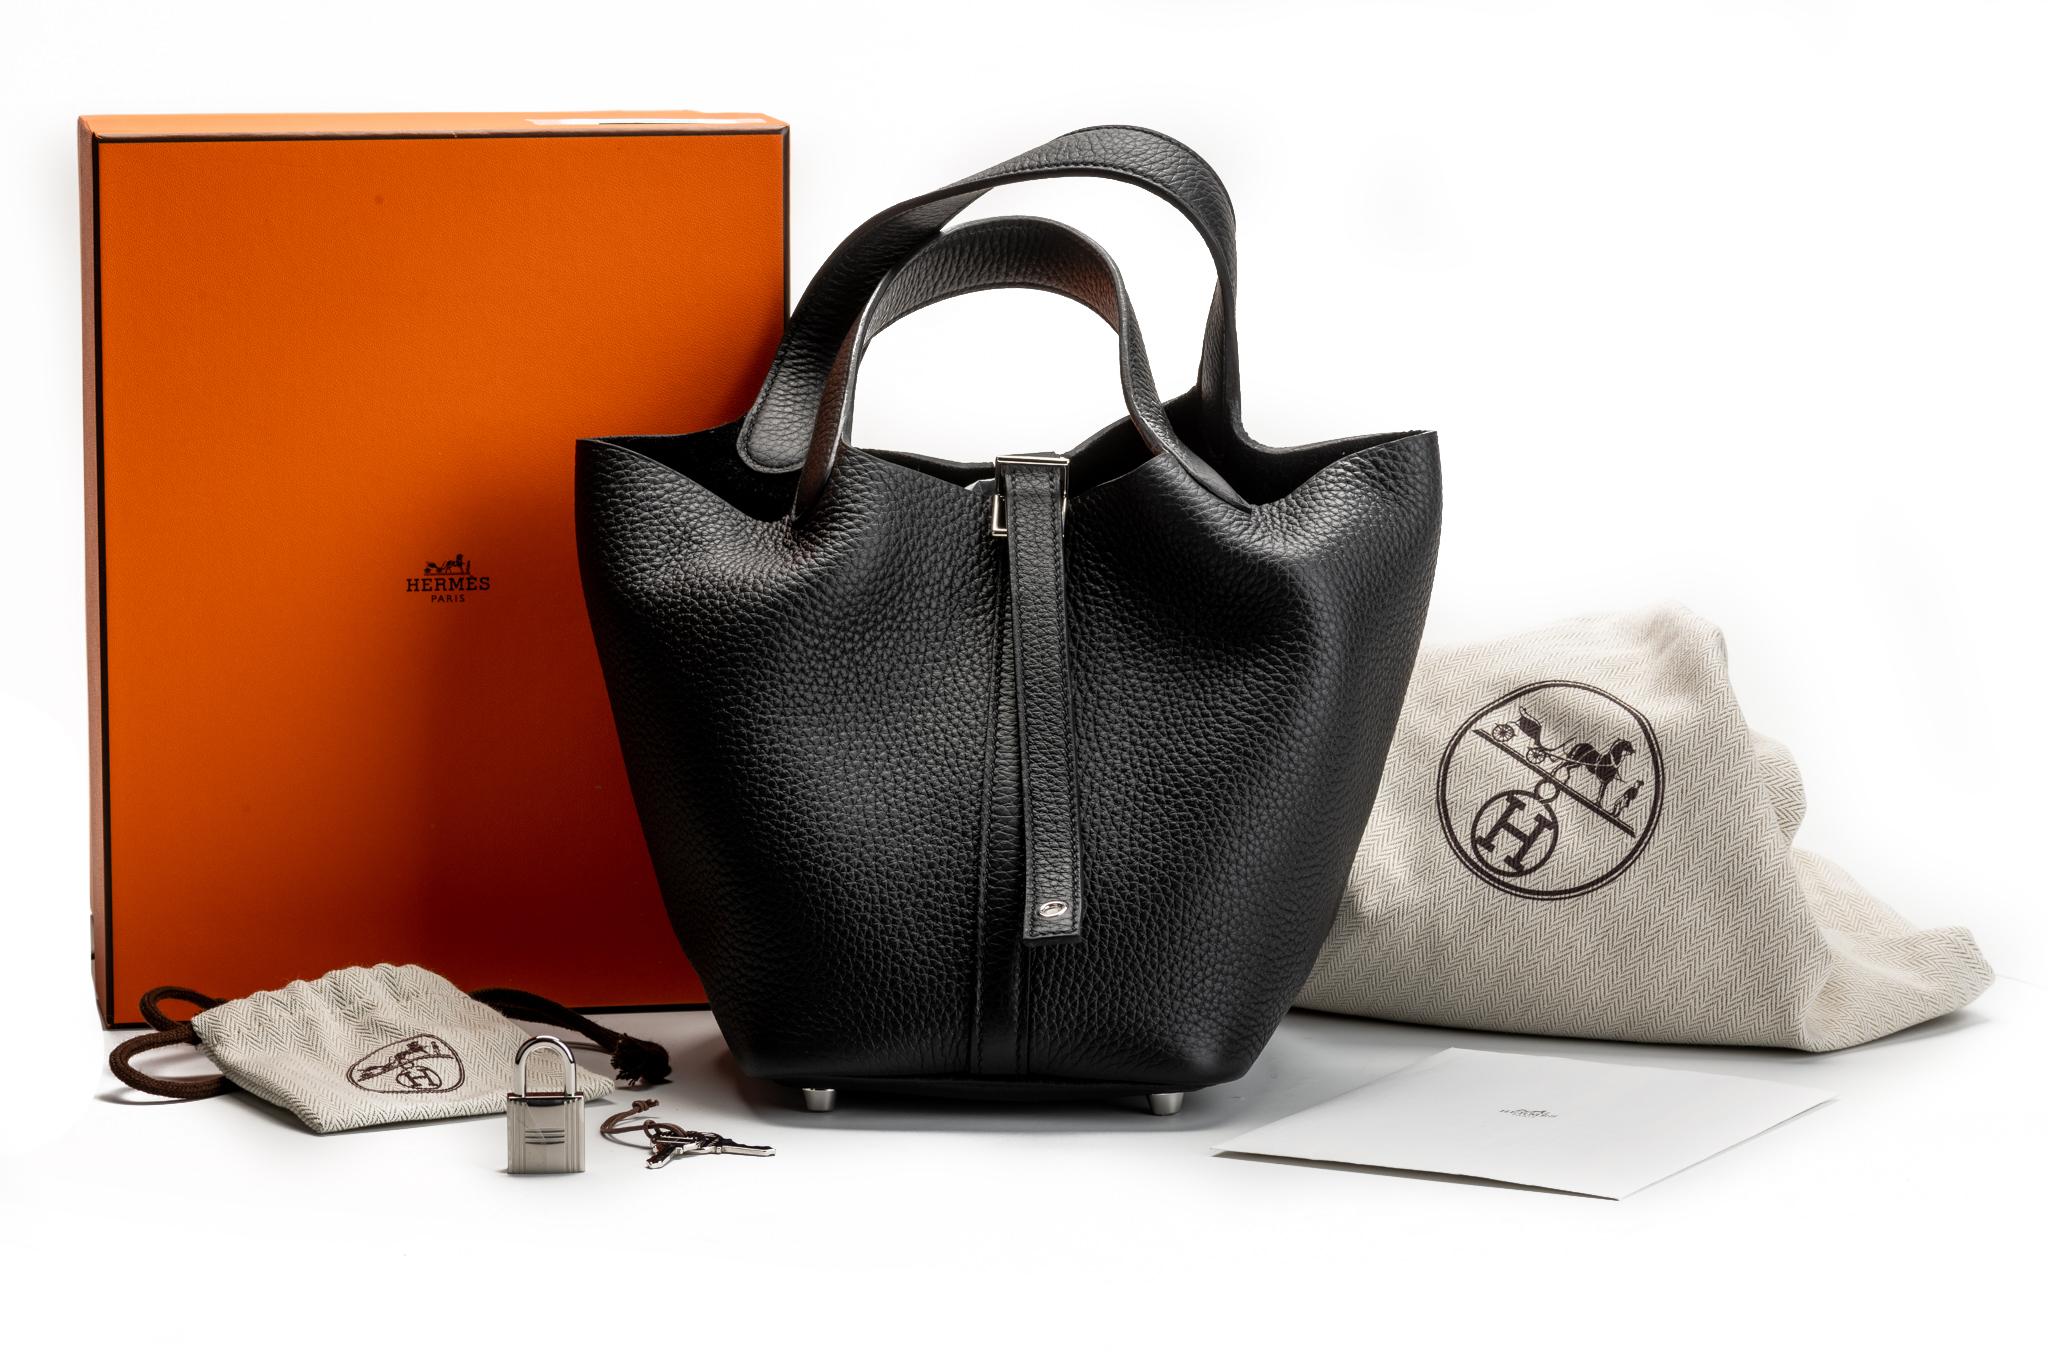 Hermes brand new in box picotin 18 cm small in black taurillon clemence leather and palladium hardware. Date stamp Y for 2020. Comes with dust cover, booklet, box and ribbon.